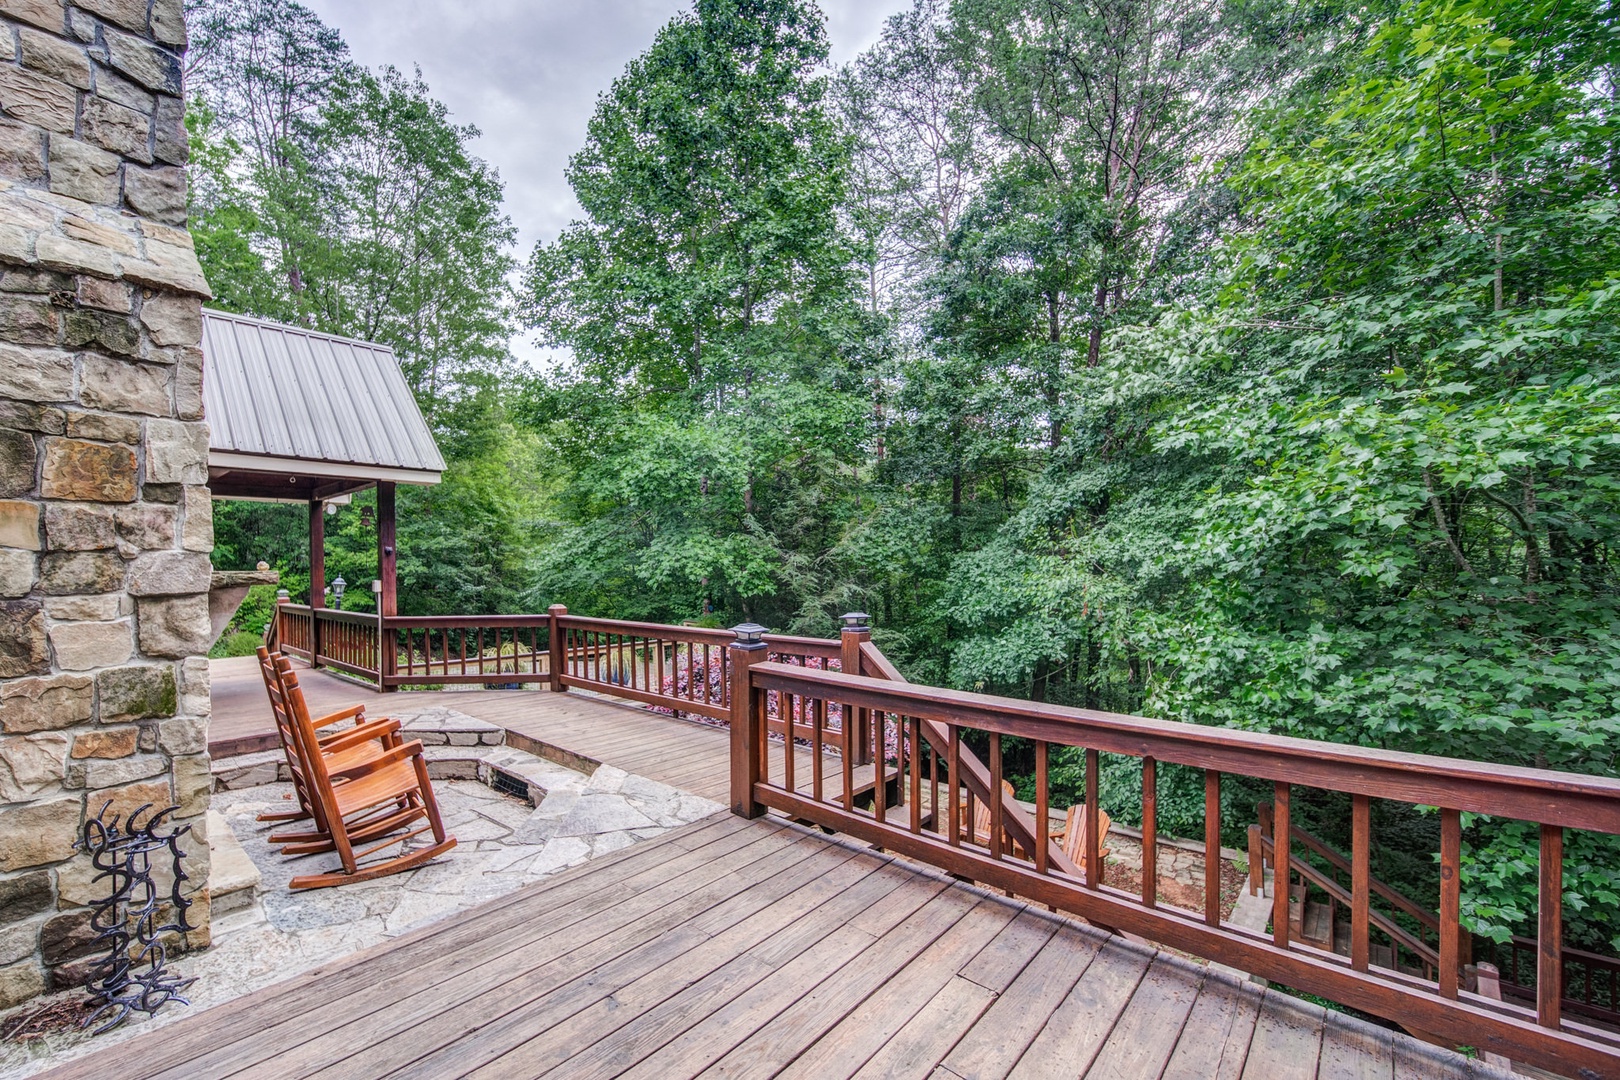 Enjoy the outdoor fireplace and rocking chairs on the deck